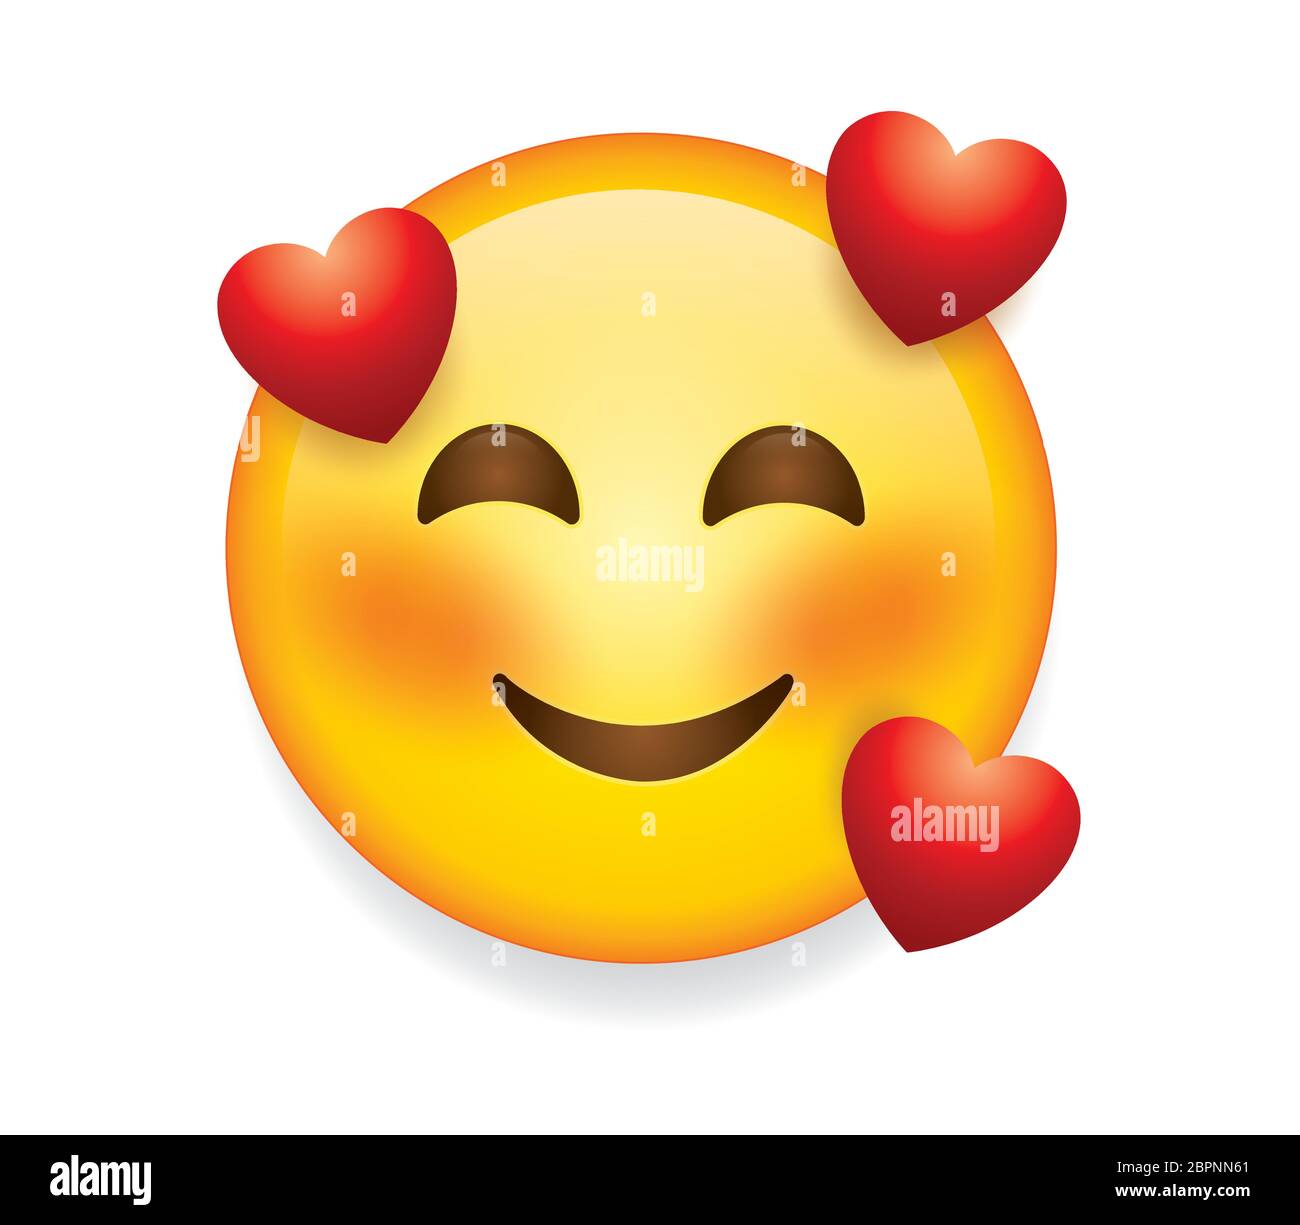 High quality emoticon on white background. Emoji blushing in love with red hearts. A yellow face emoji in love with closed eyes.Popular chat elements. Stock Vector